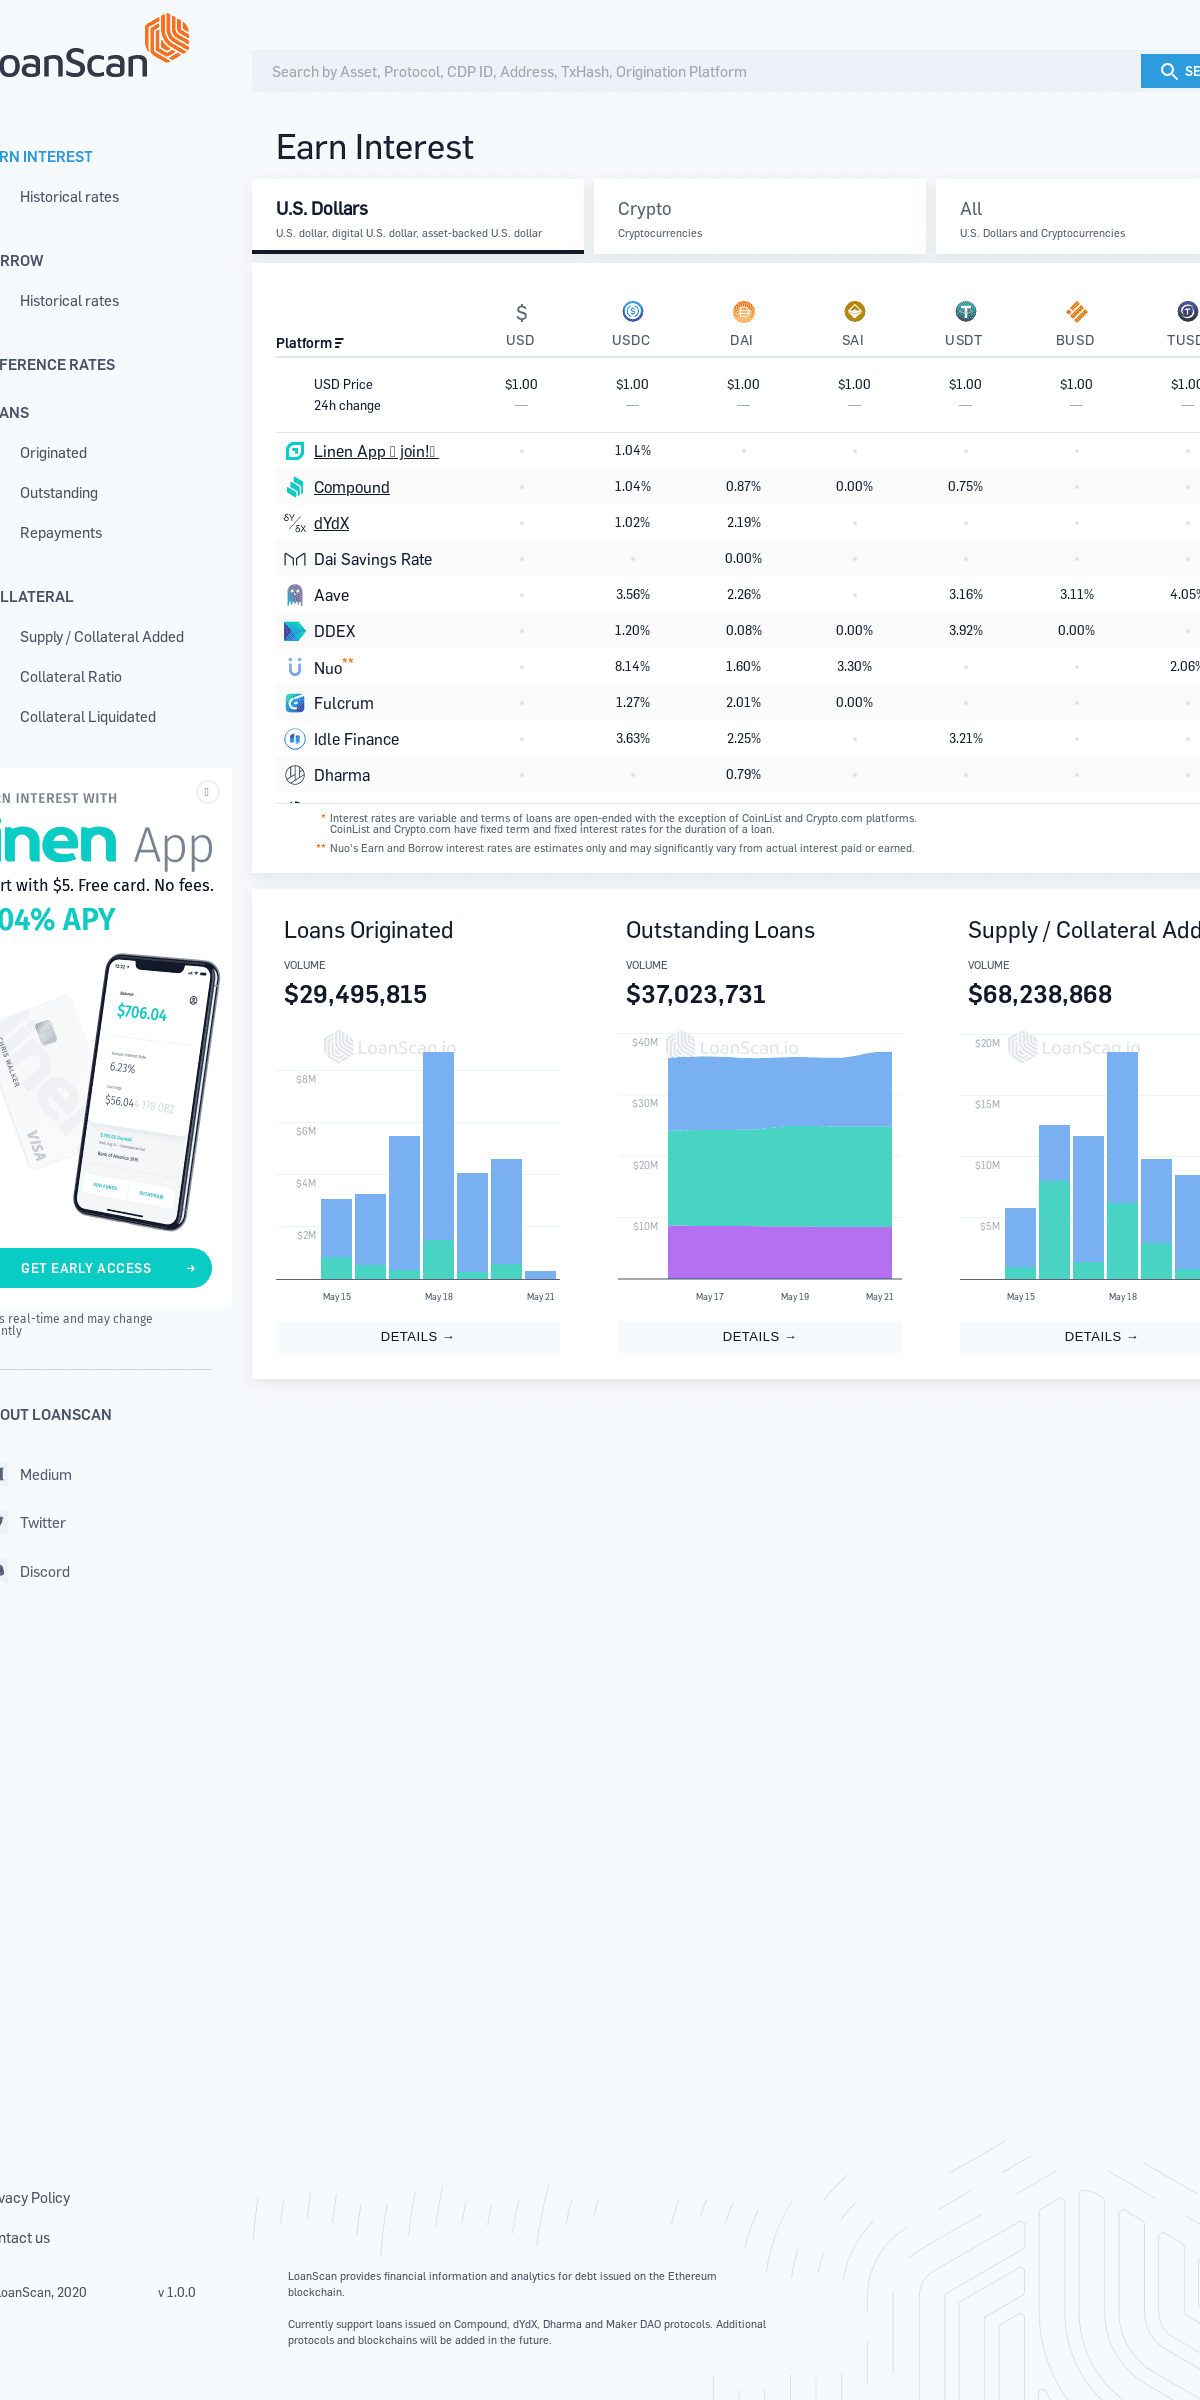 A complete backup of loanscan.io